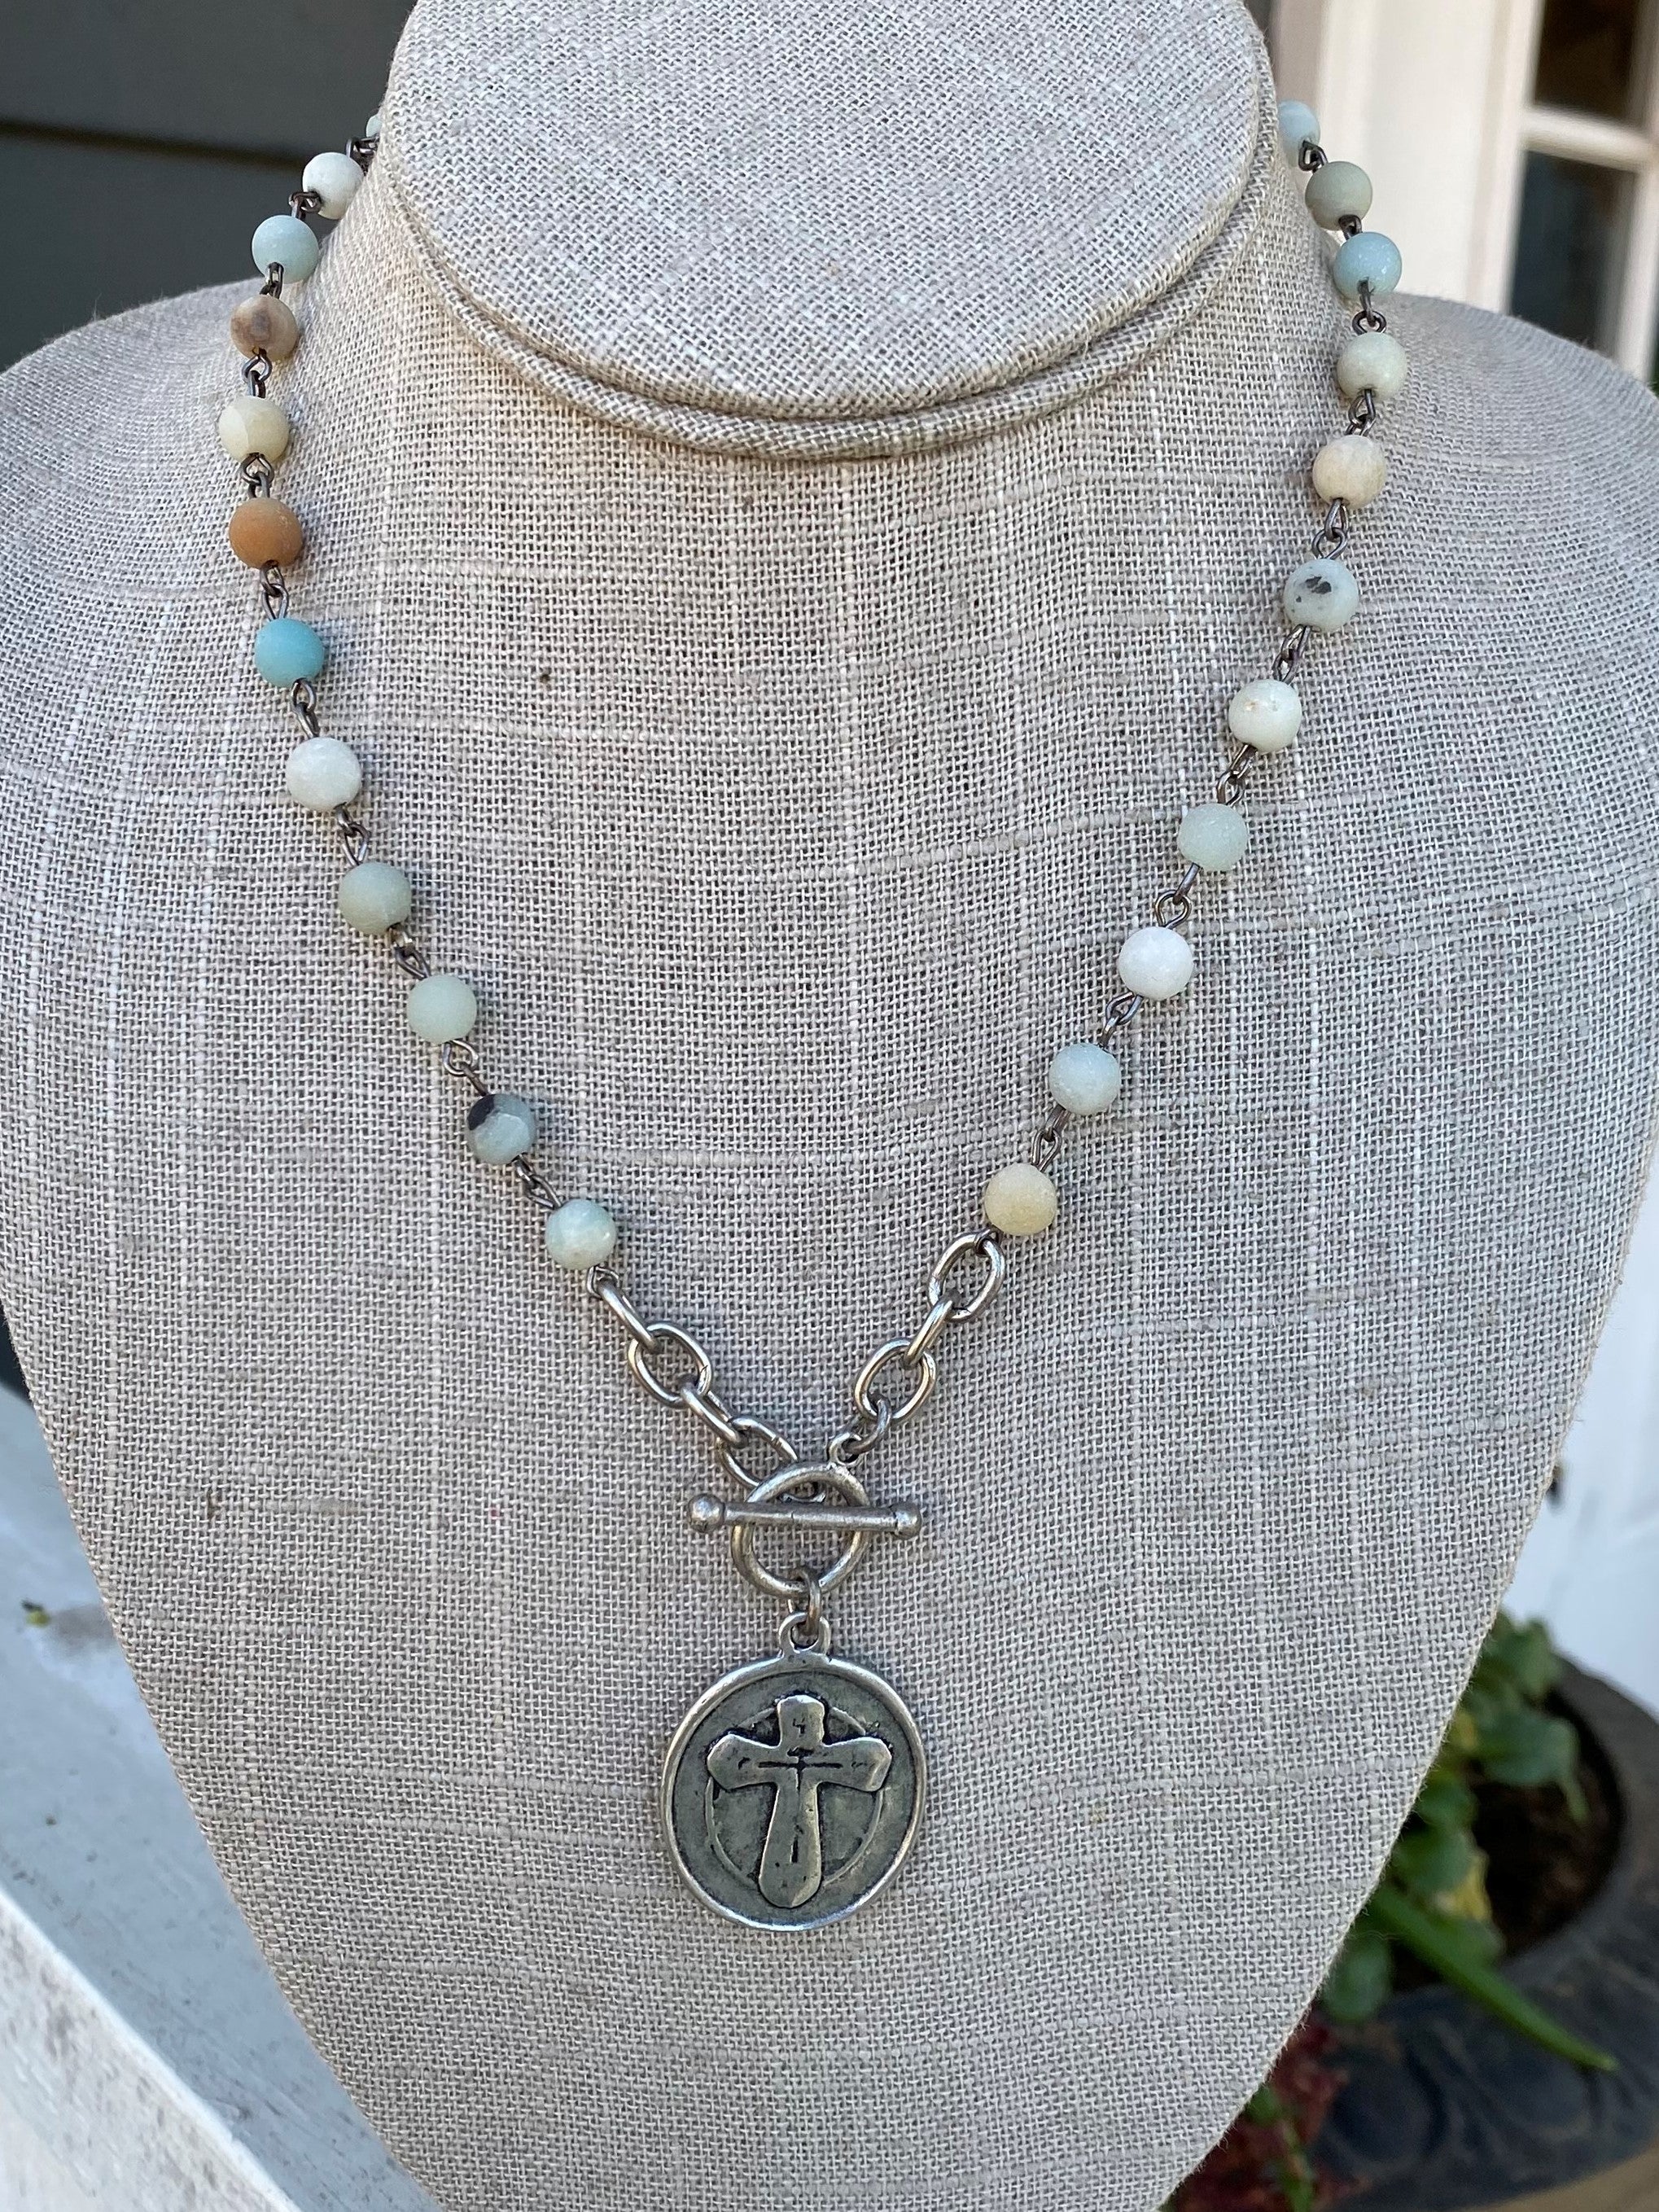 Beaded Necklace with Cross & Angel Charm